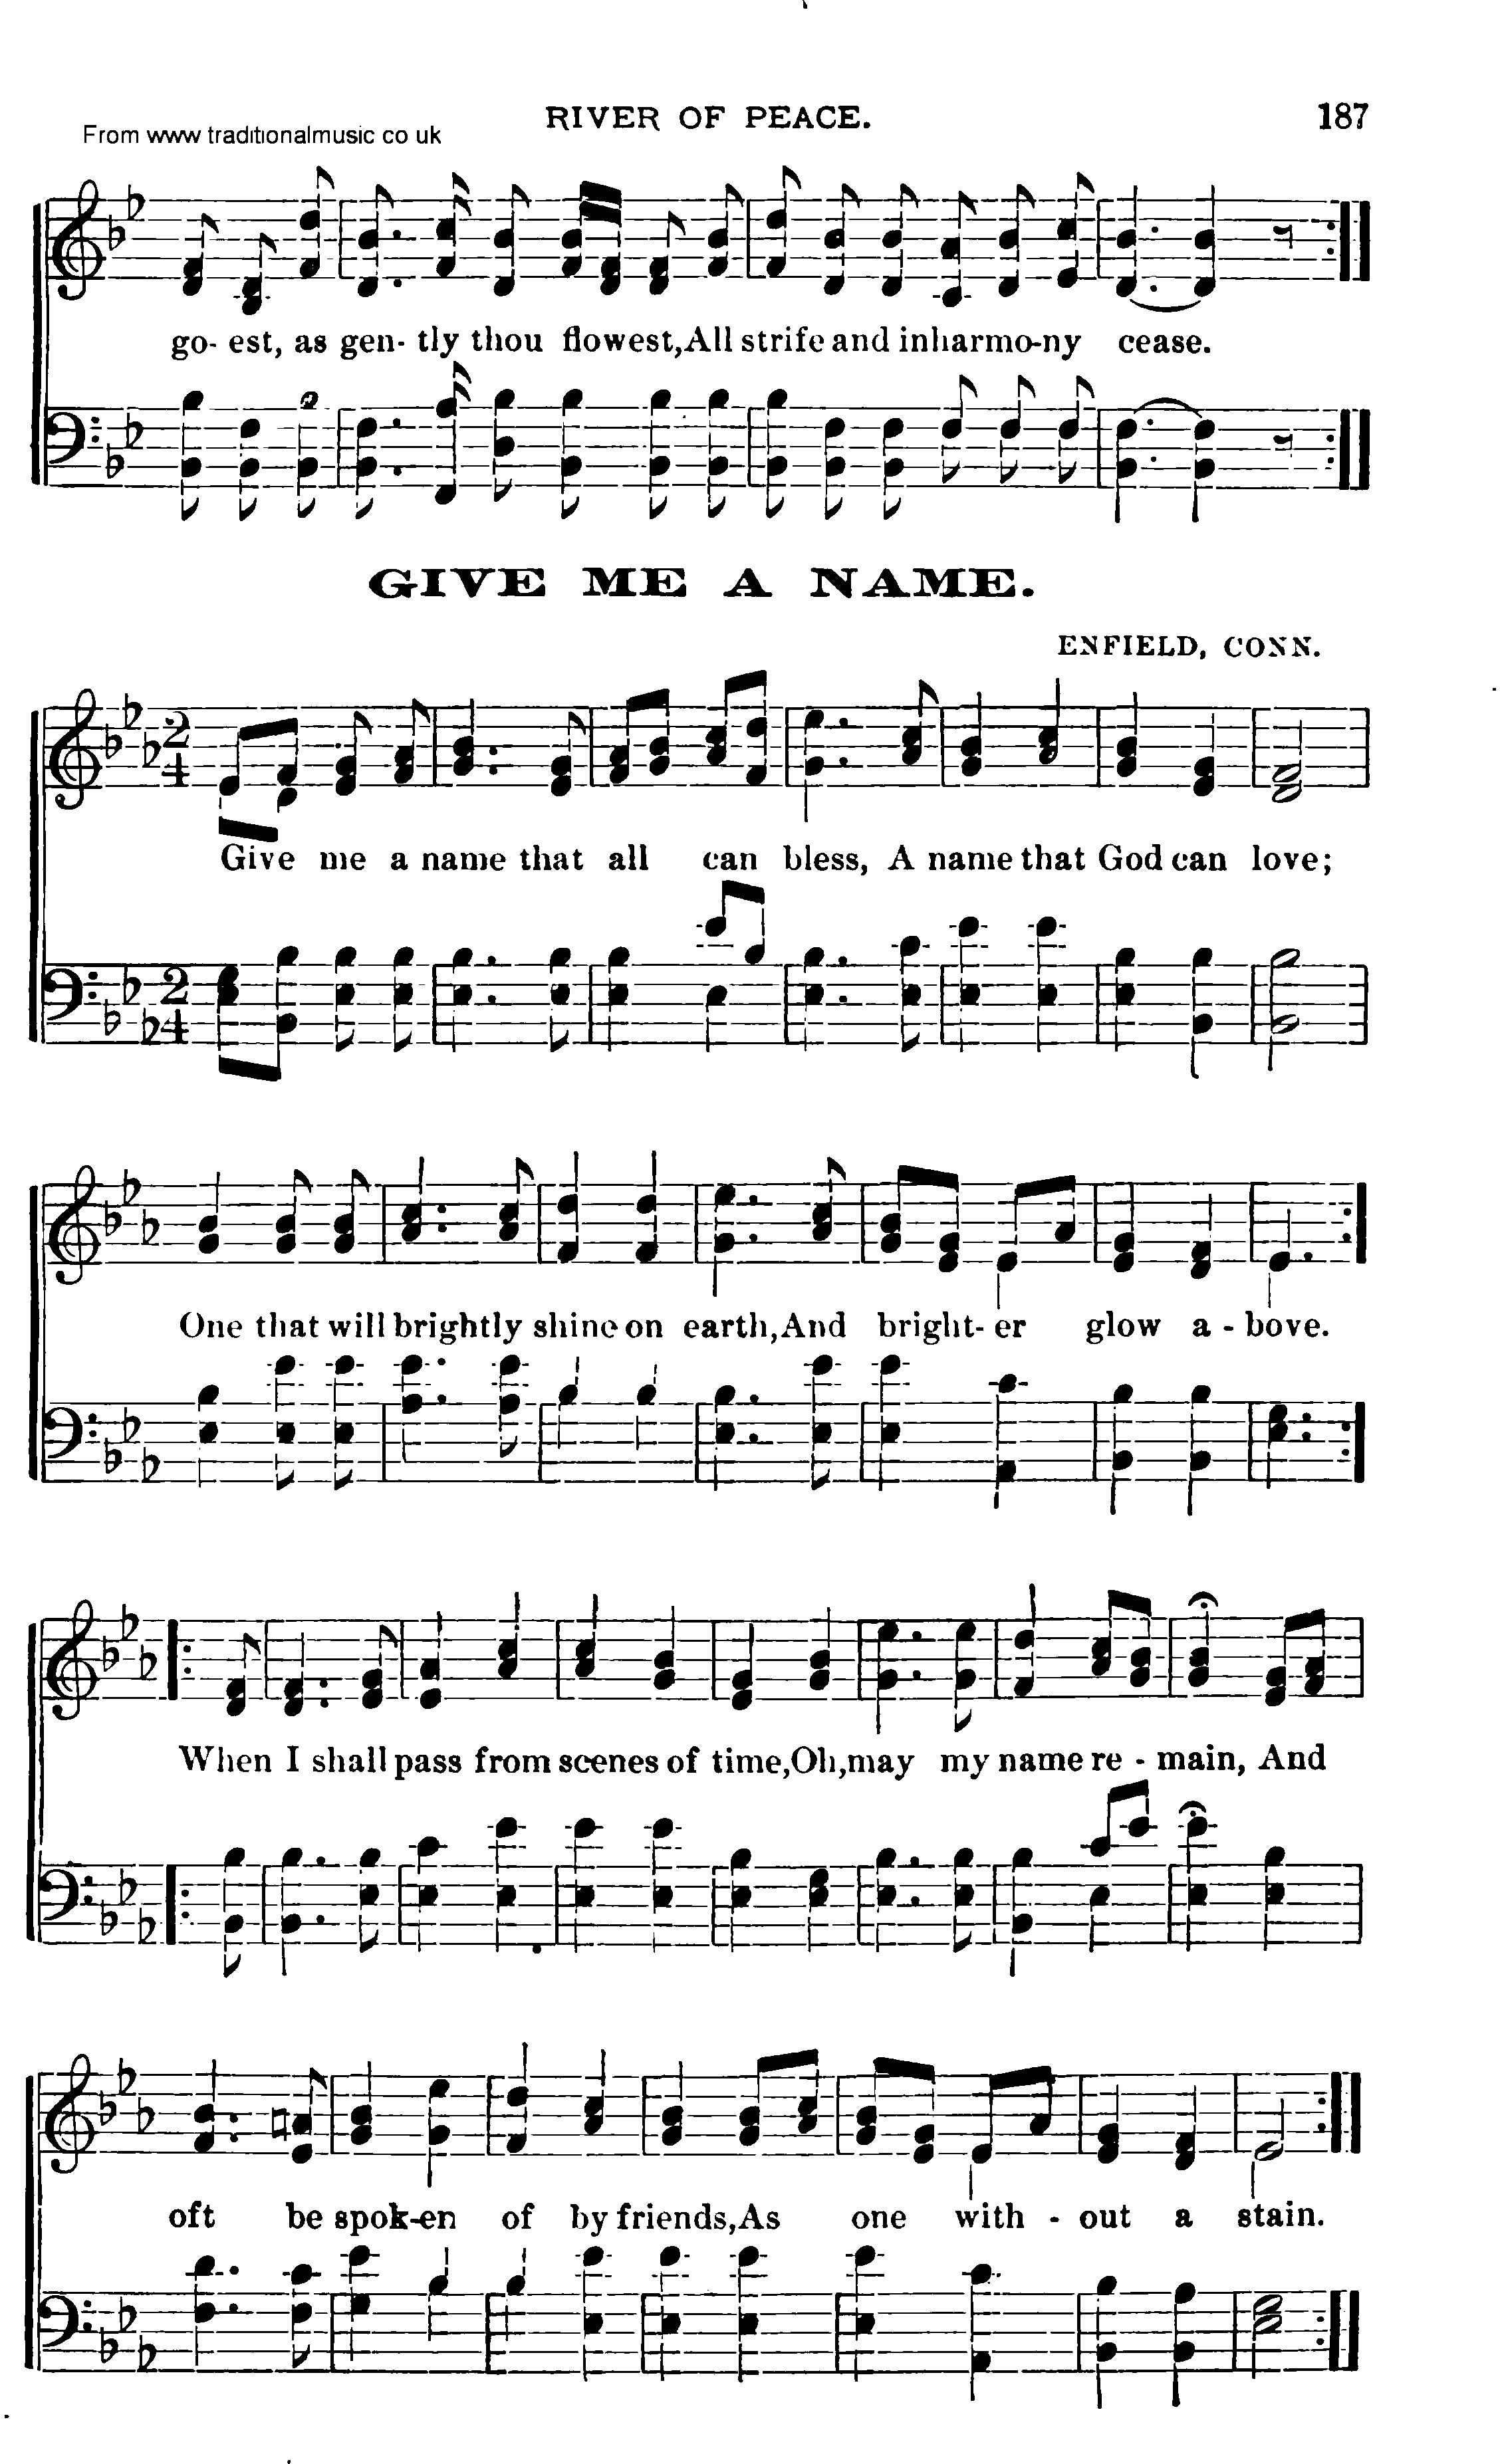 Shaker Music collection, Hymn: Give Me A Name, sheetmusic and PDF